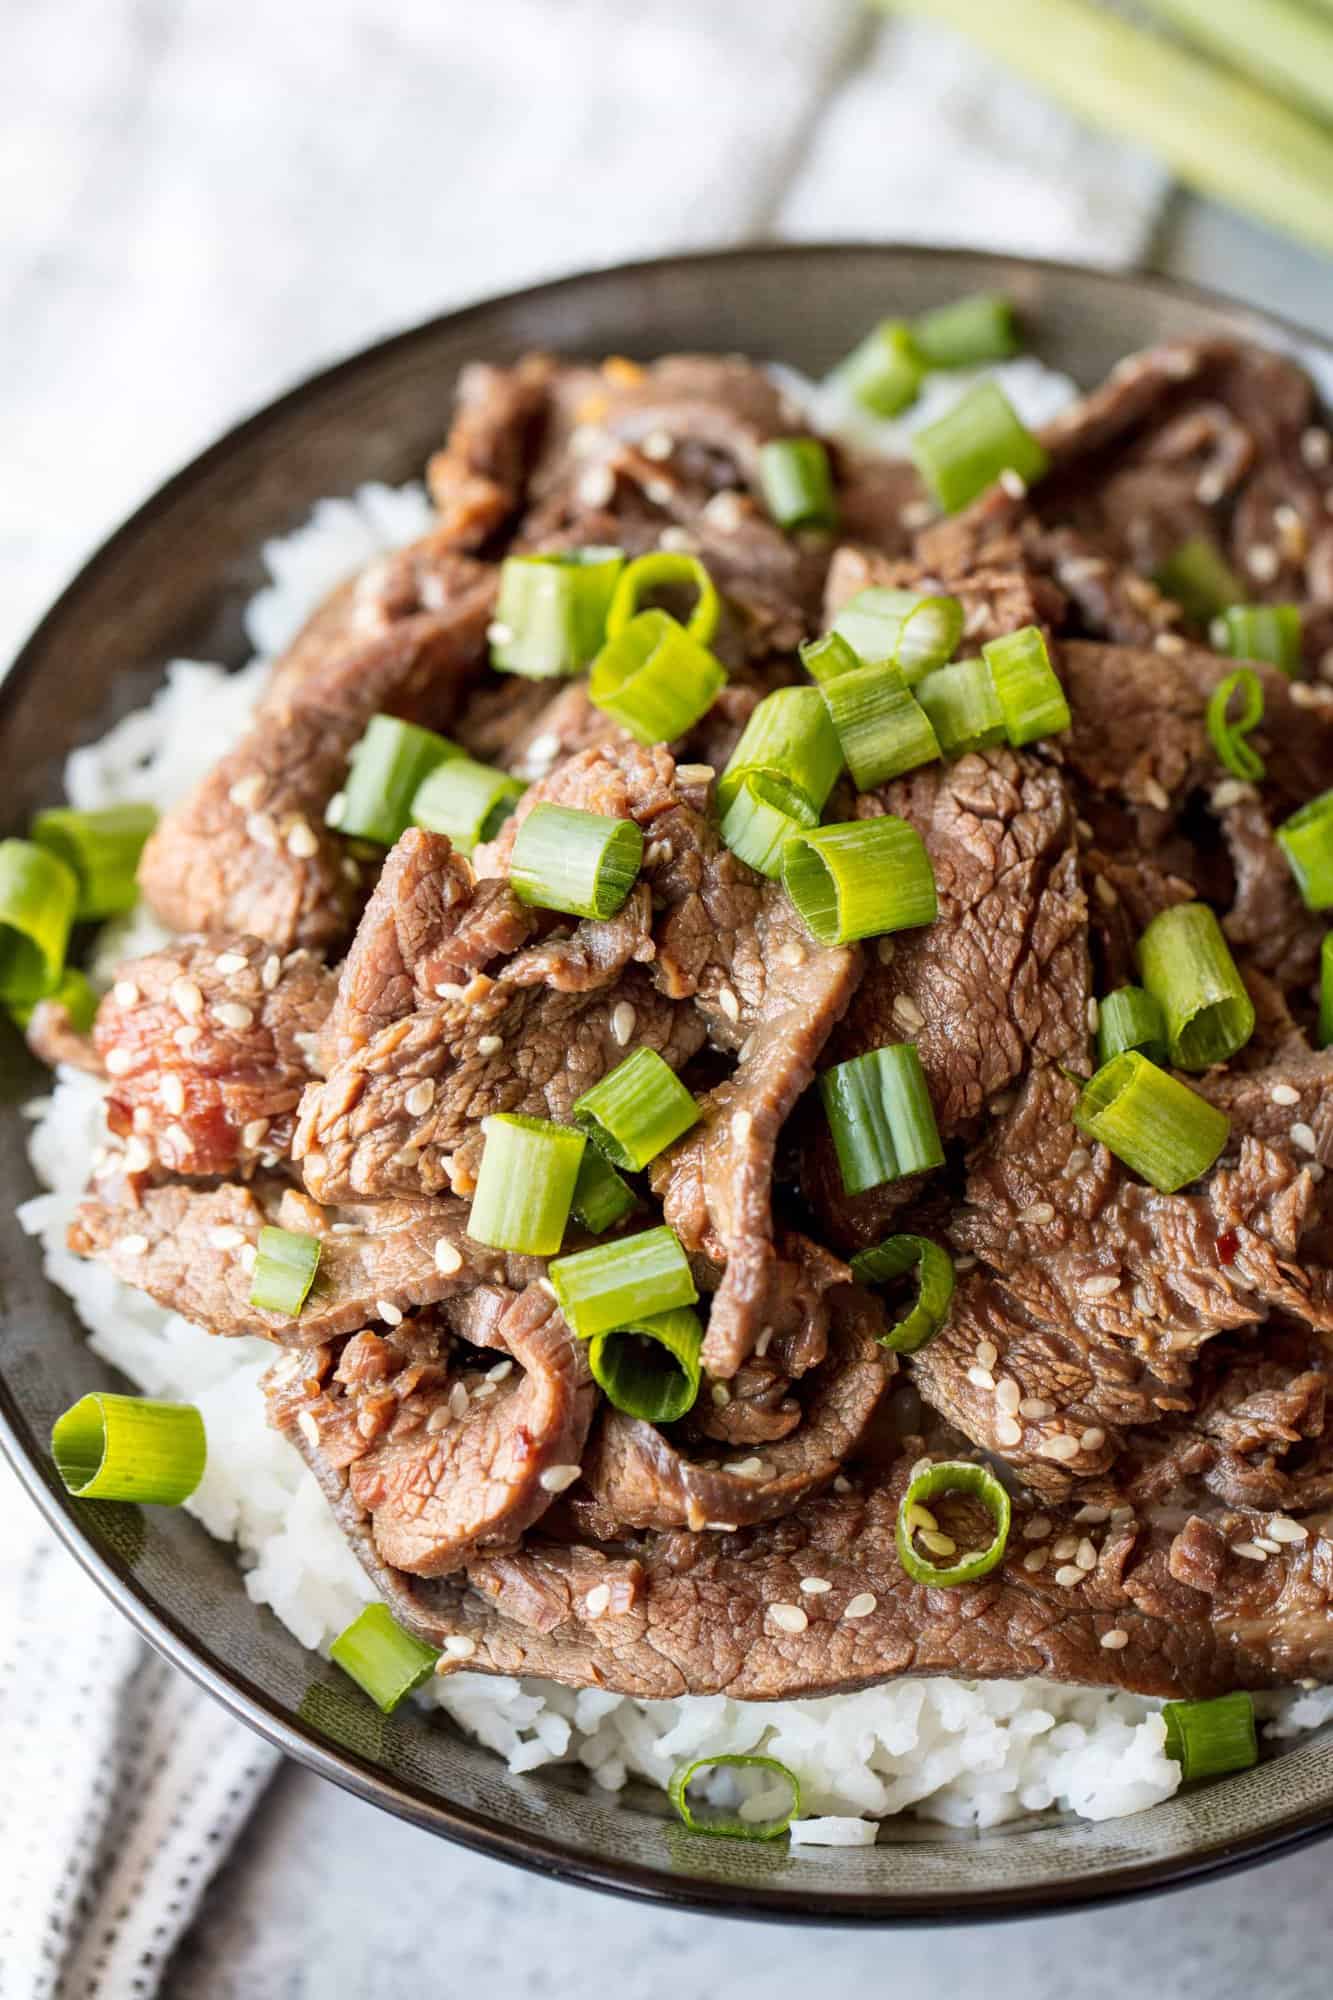 Korean Beef Bulgogi is a super easy way to enjoy tasty Korean food at home. A quick and simple marinade for flank steak is all that's needed to enjoy this classic.